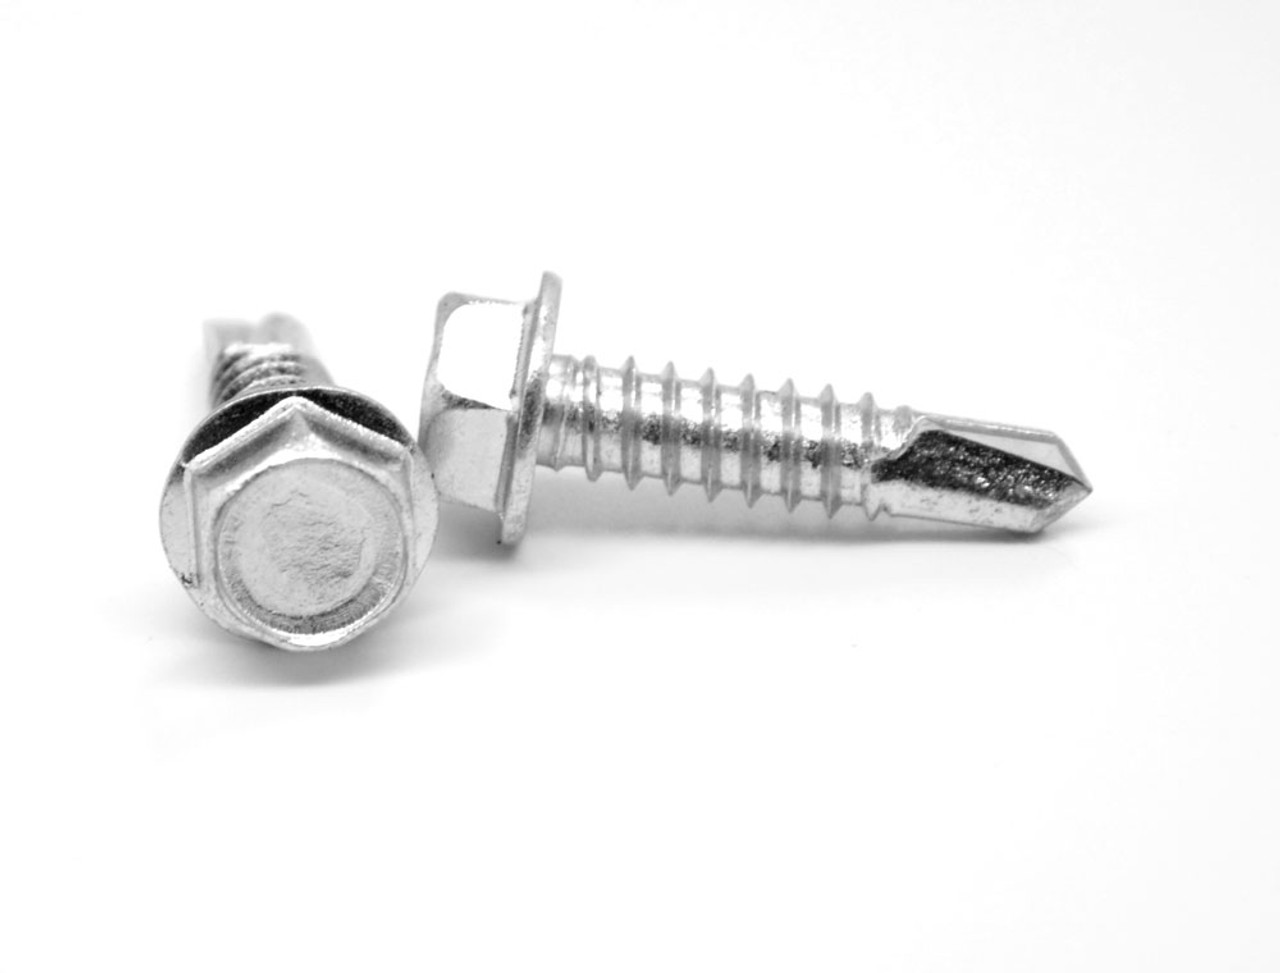 #10-16 x 1 3/4" (FT) Self Drilling Screw Hex Washer Head #3 Point Stainless Steel 410